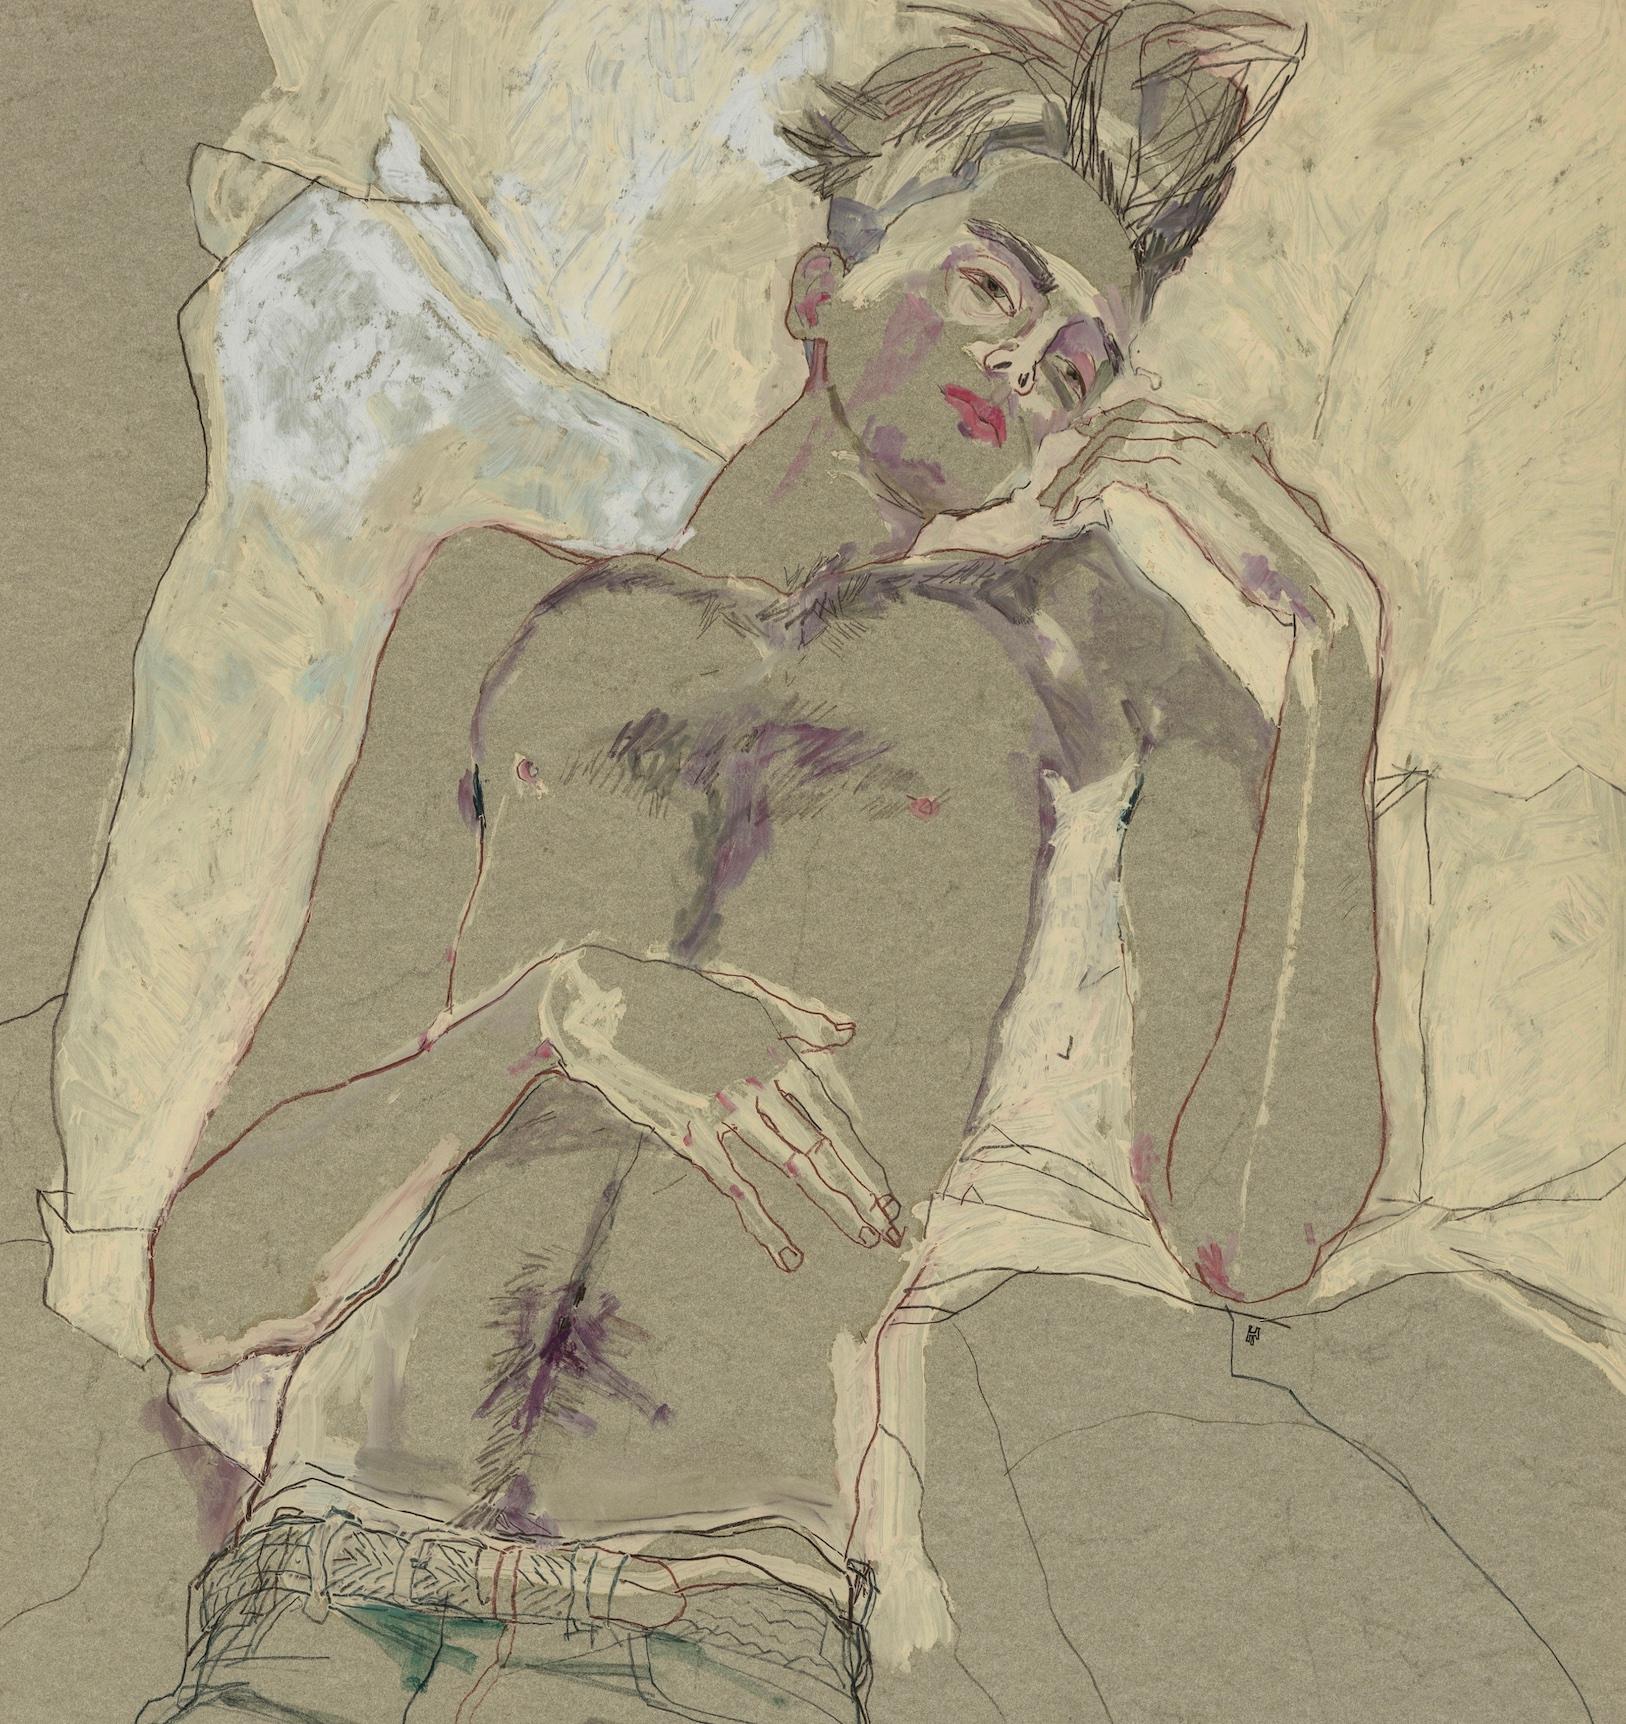 Jake W. (Lying Down - No Shirt), Mixed media on grey paper - Contemporary Painting by Howard Tangye